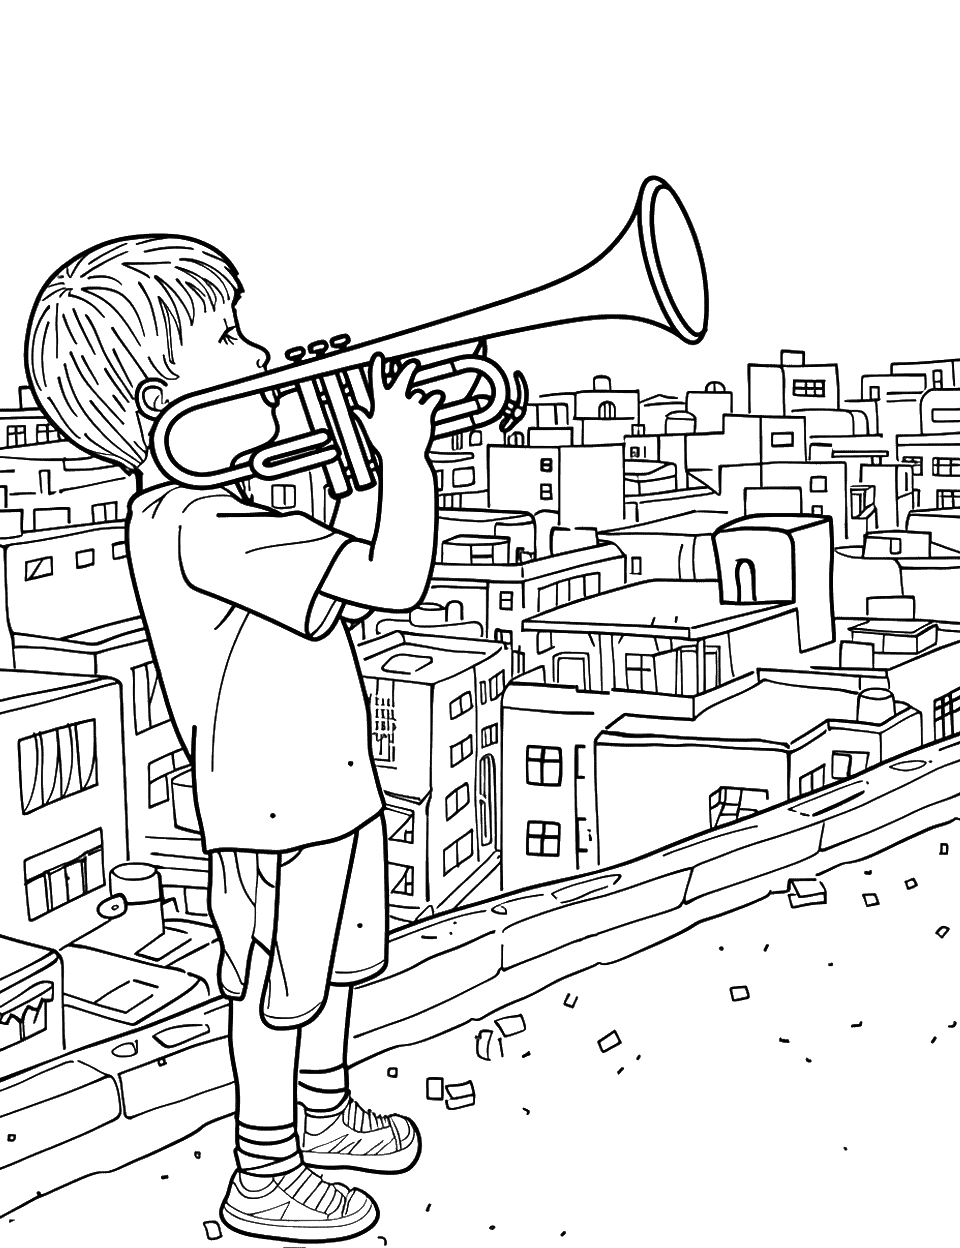 Trumpet on the Rooftop Music Coloring Page - A child blowing a trumpet on a city rooftop with buildings in the background.